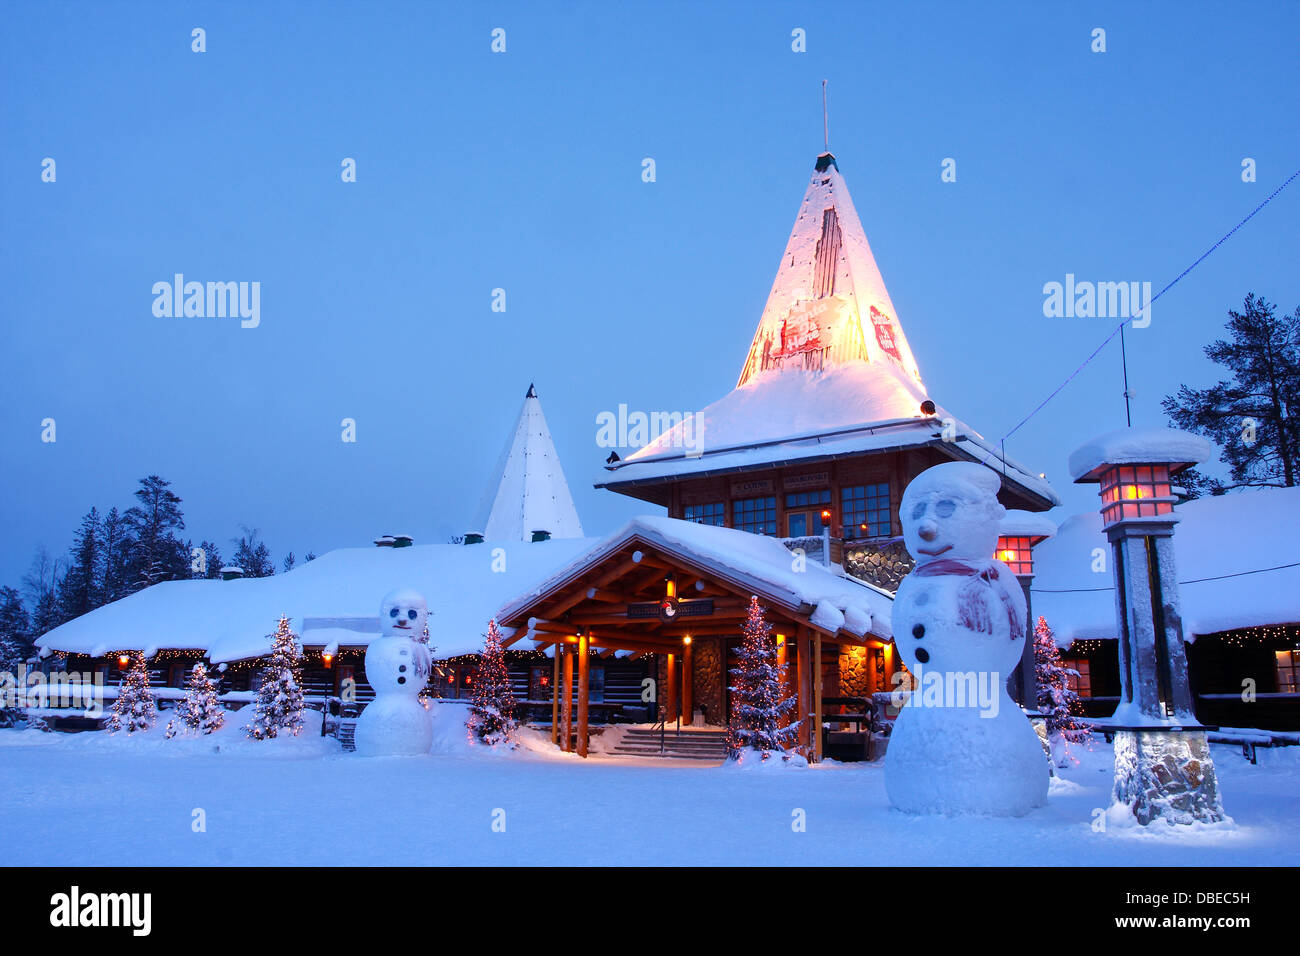 Visiting The Santa Claus Village In Rovaniemi Is A Christmas